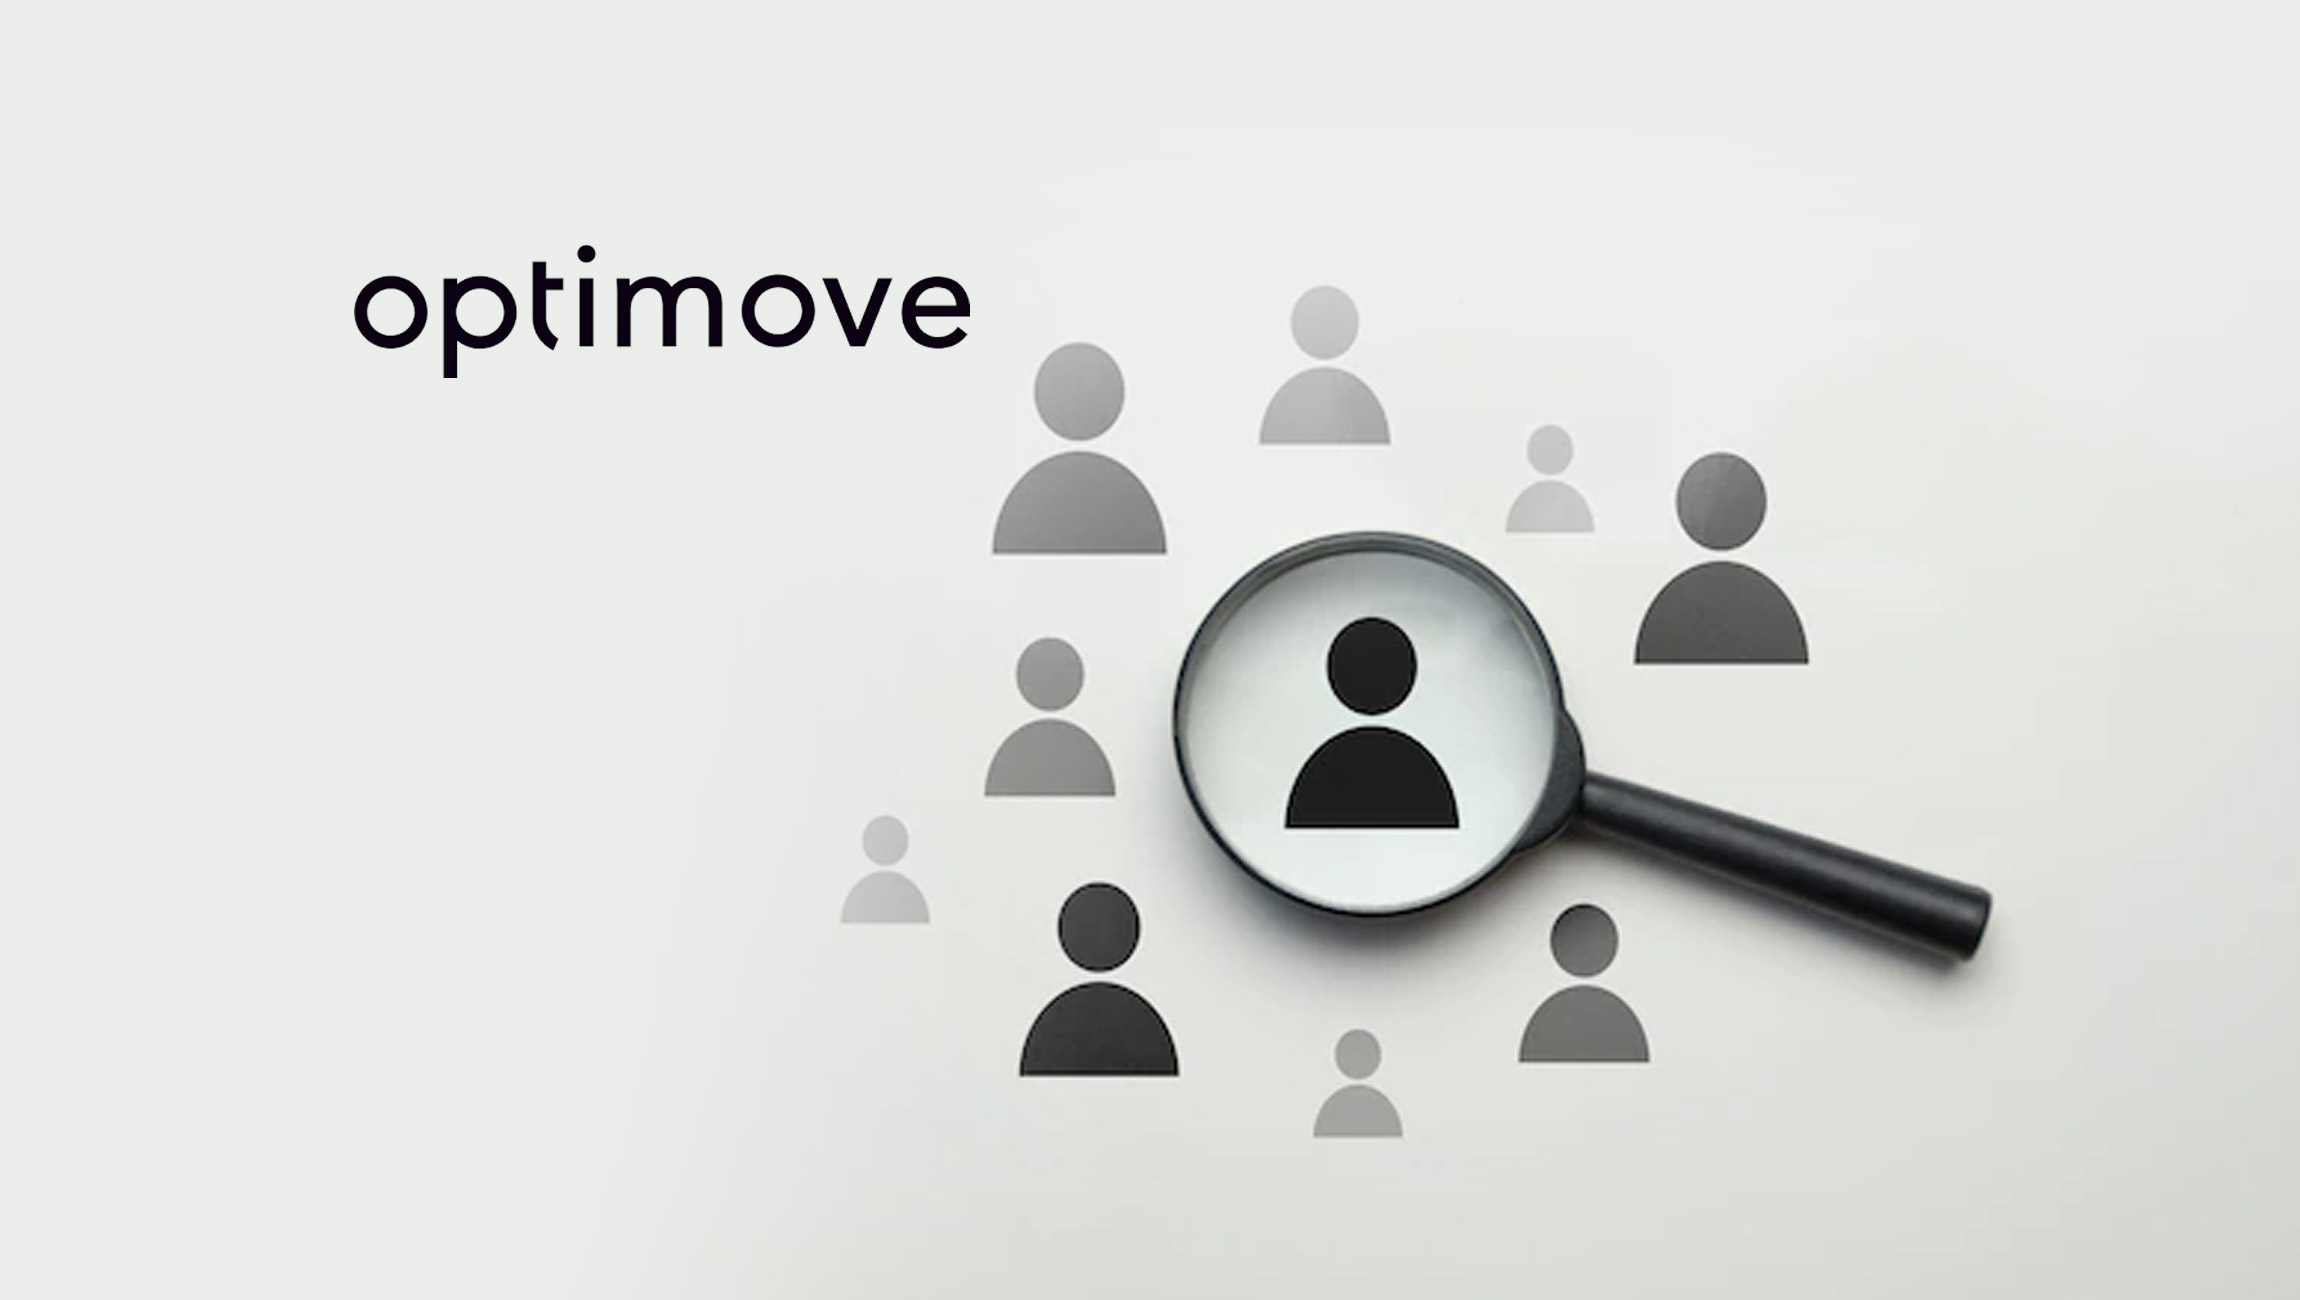 Optimove Appoints Tara Bryant as Chief Revenue Officer to Accelerate Growth Across Markets 1